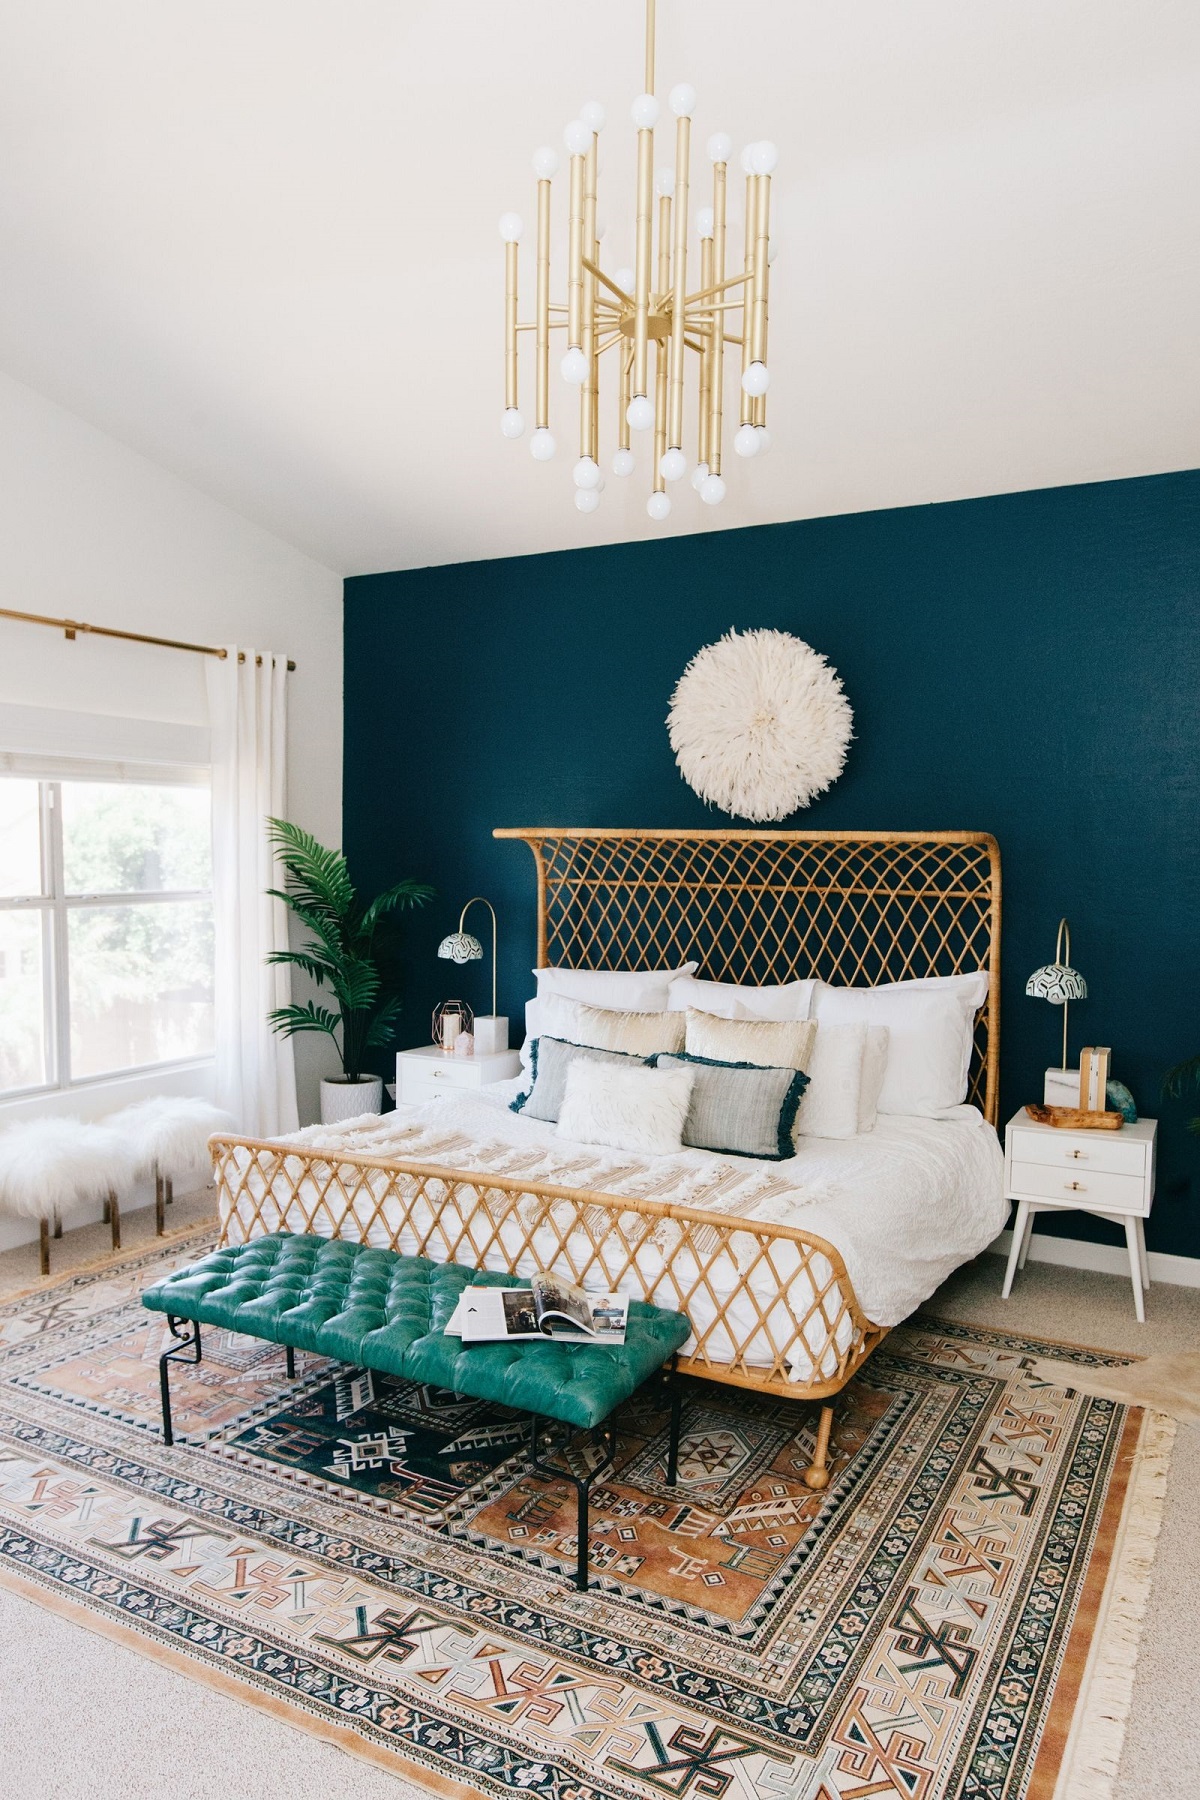 How to Decorate with Jewel Tones